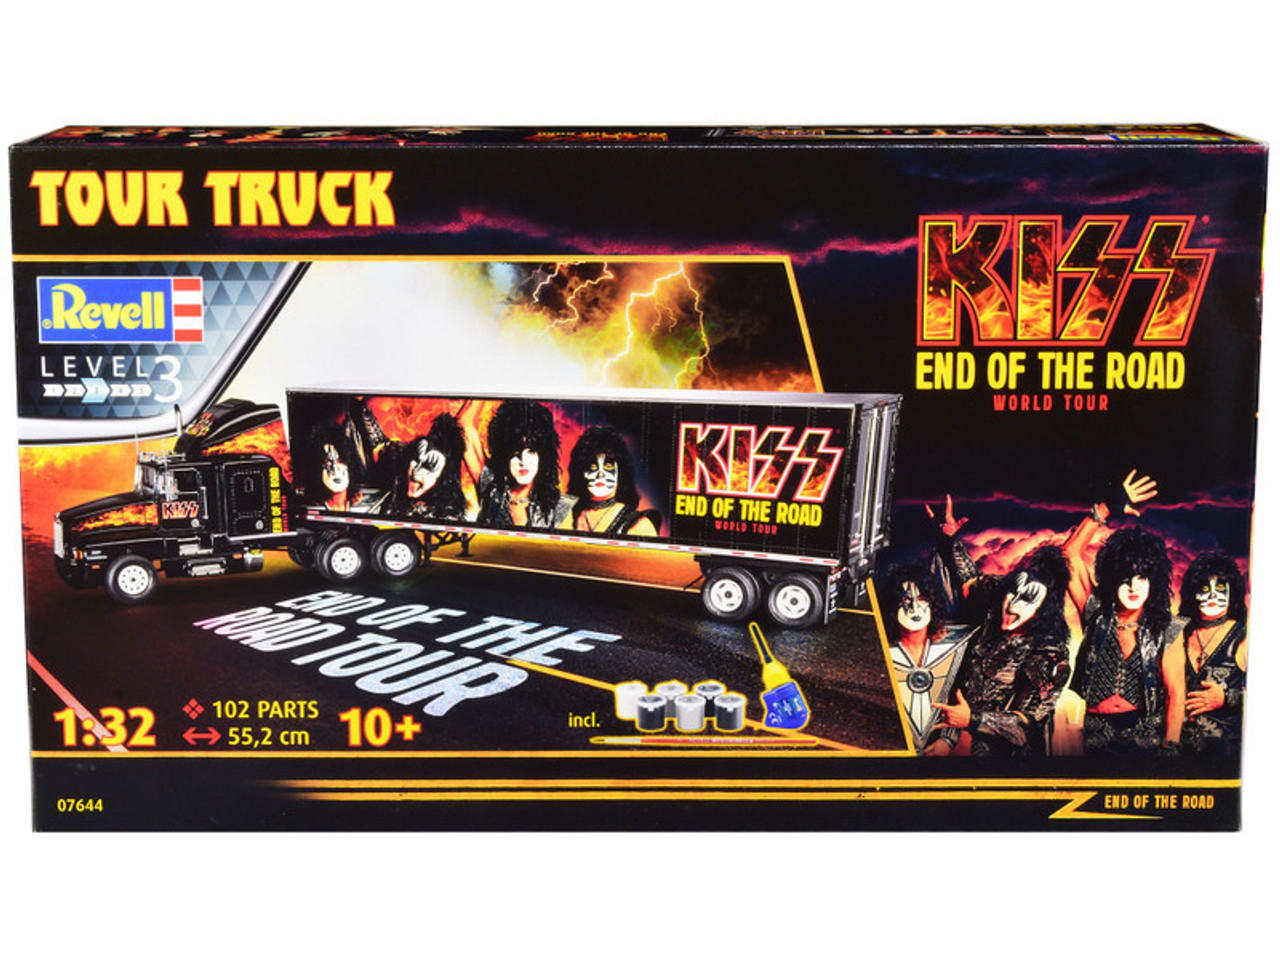 Level 3 Model Kit Kenworth Tour Truck "KISS End of the Road World Tour" 1/32 Scale Model by Revell